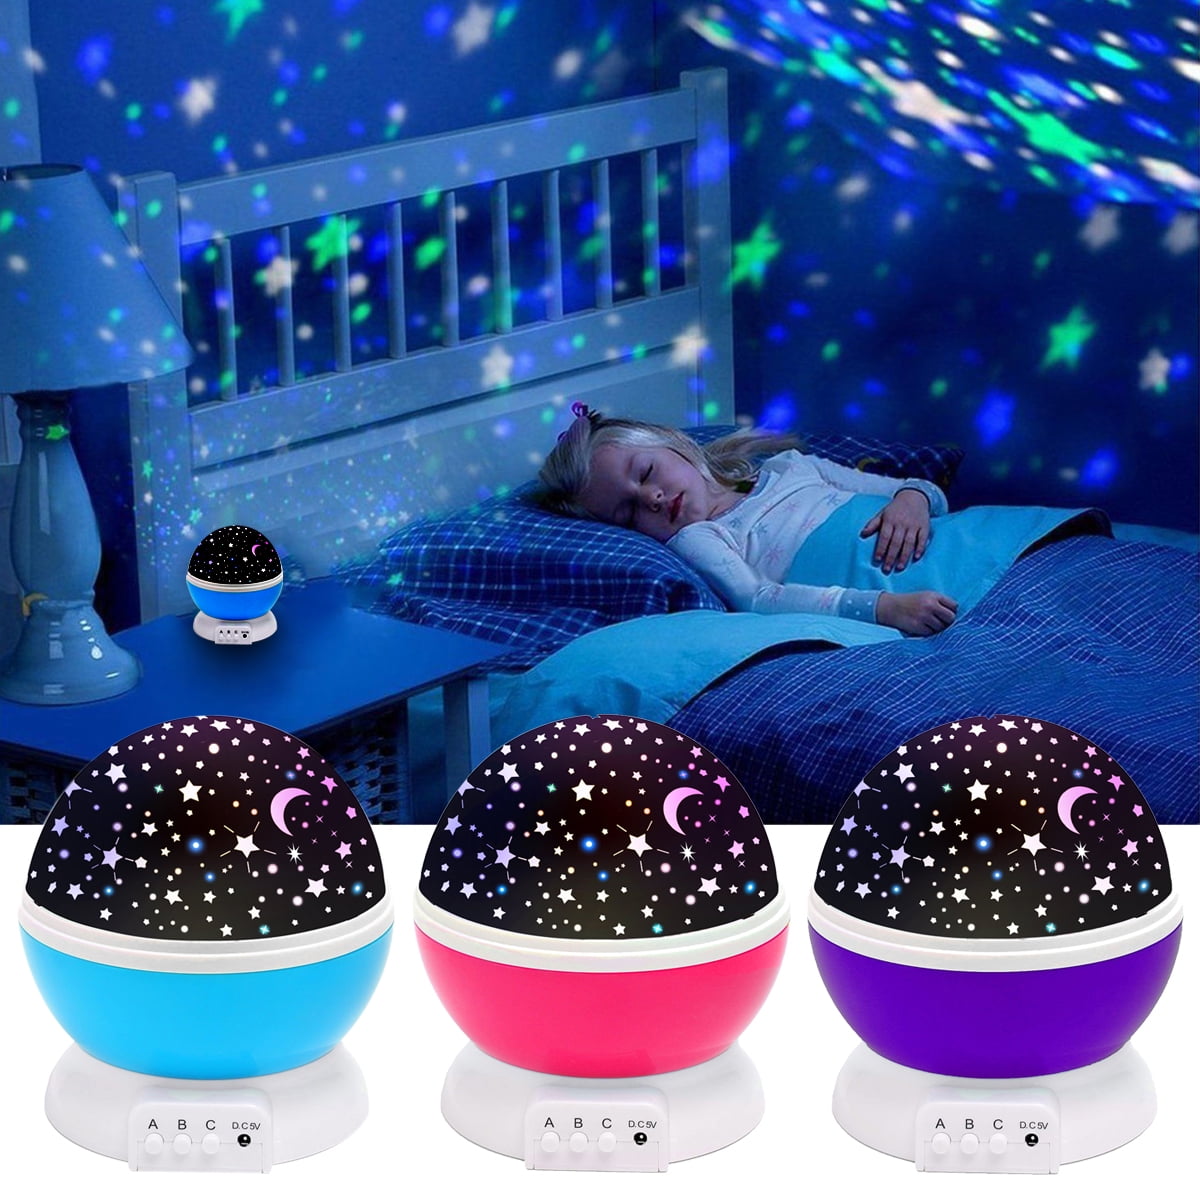 Kids Night Light Star Projector with LED Timer 360 Degree Rotation Night Lighting lamp for Baby’s Bedroom Best Gifts Slippers for Baby Girls Boys Children-Film 3 Set